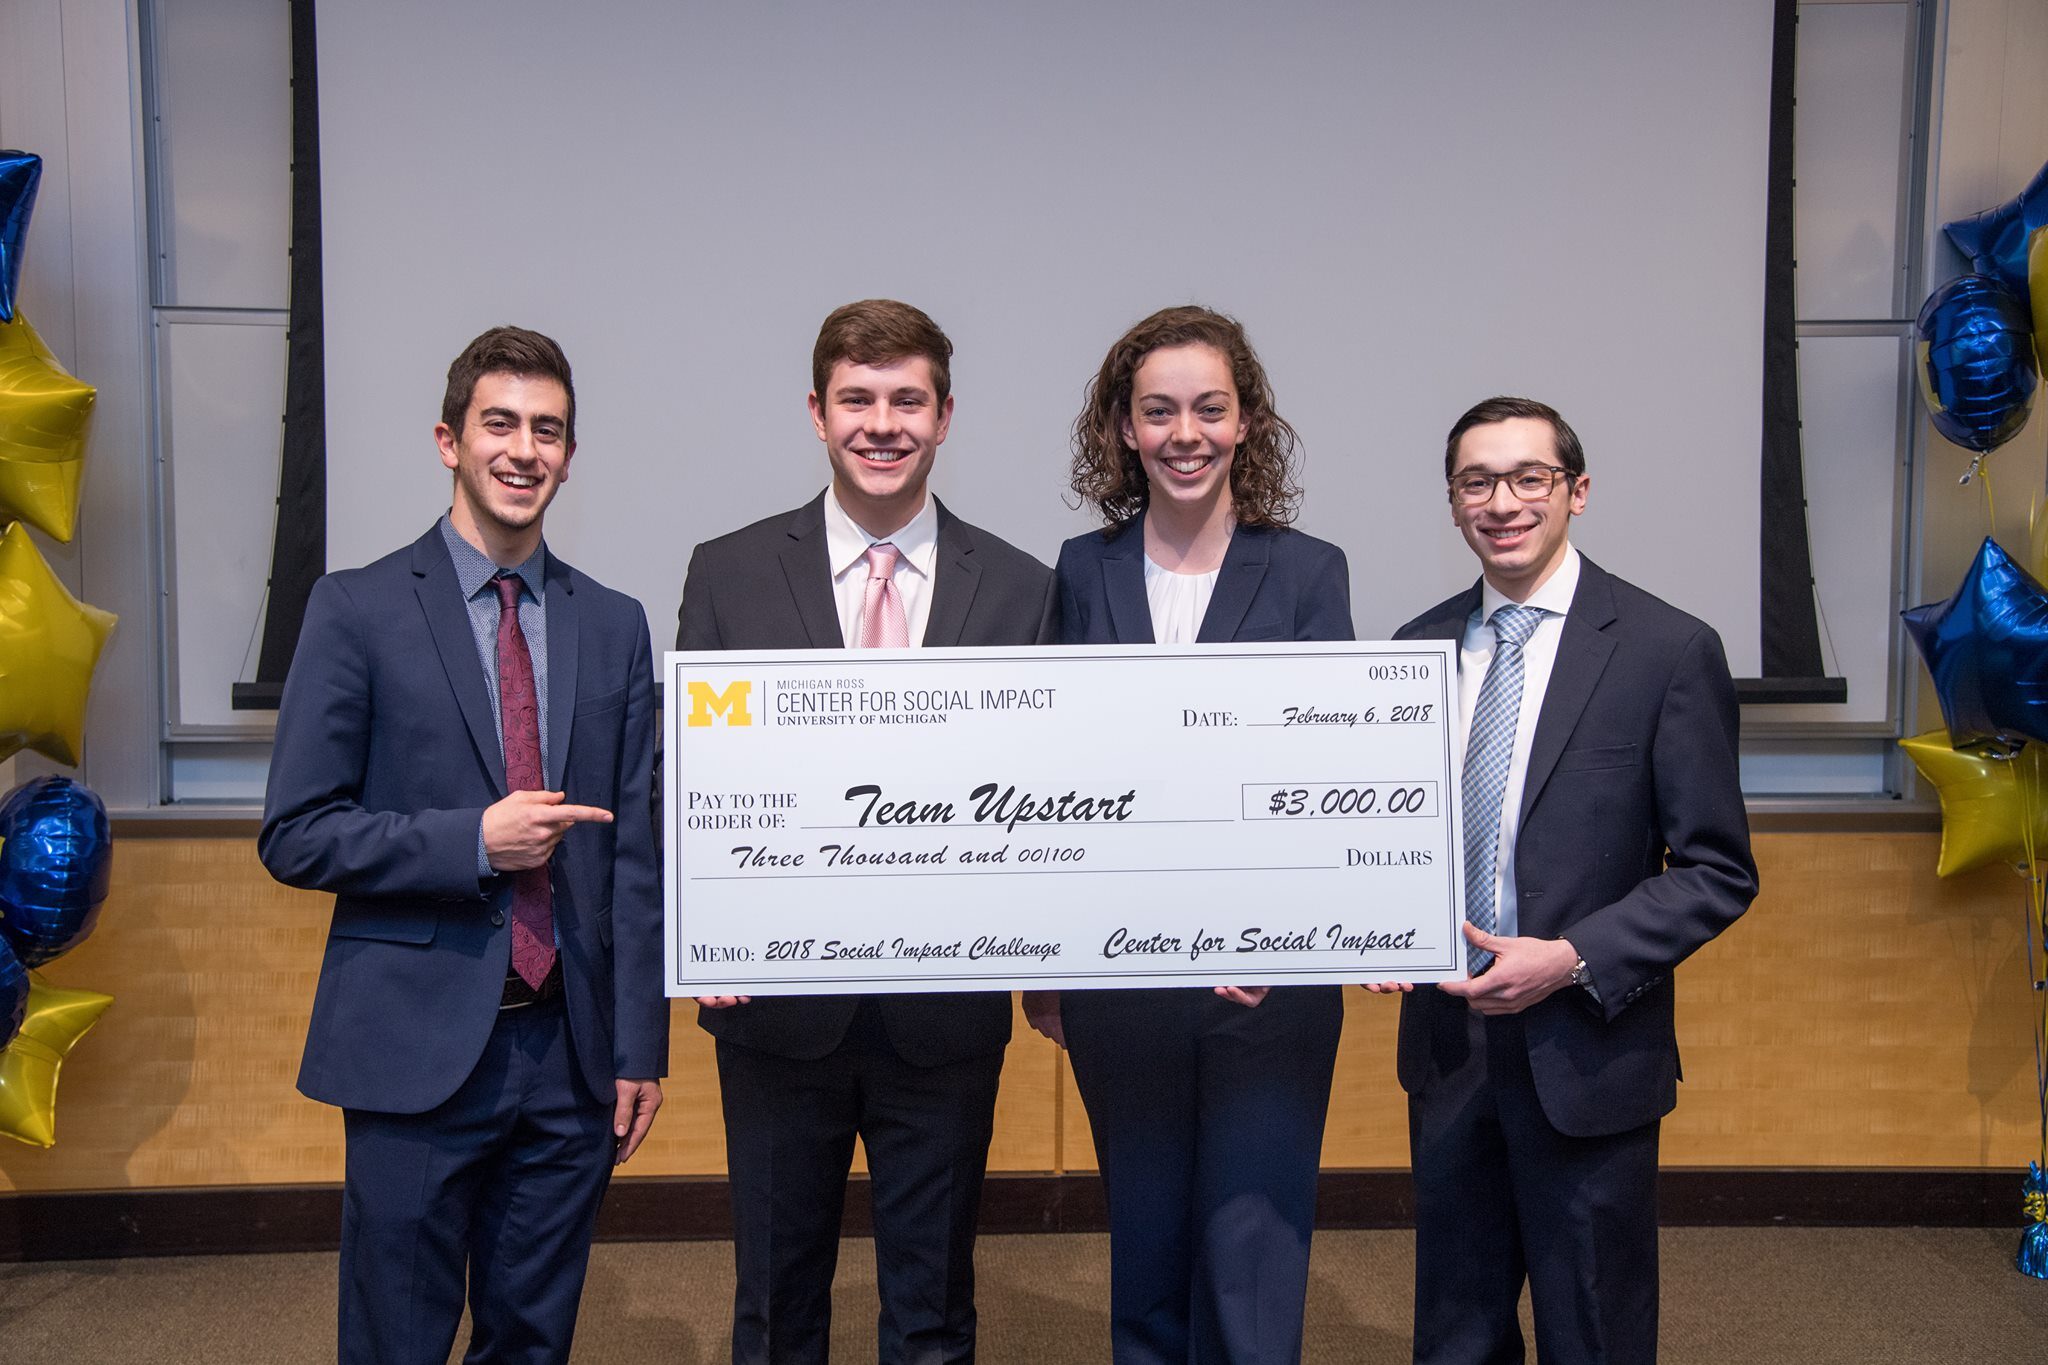 Team Upstart poses with a check for $3,000 that they won in the 2018 Social Impact Challenge